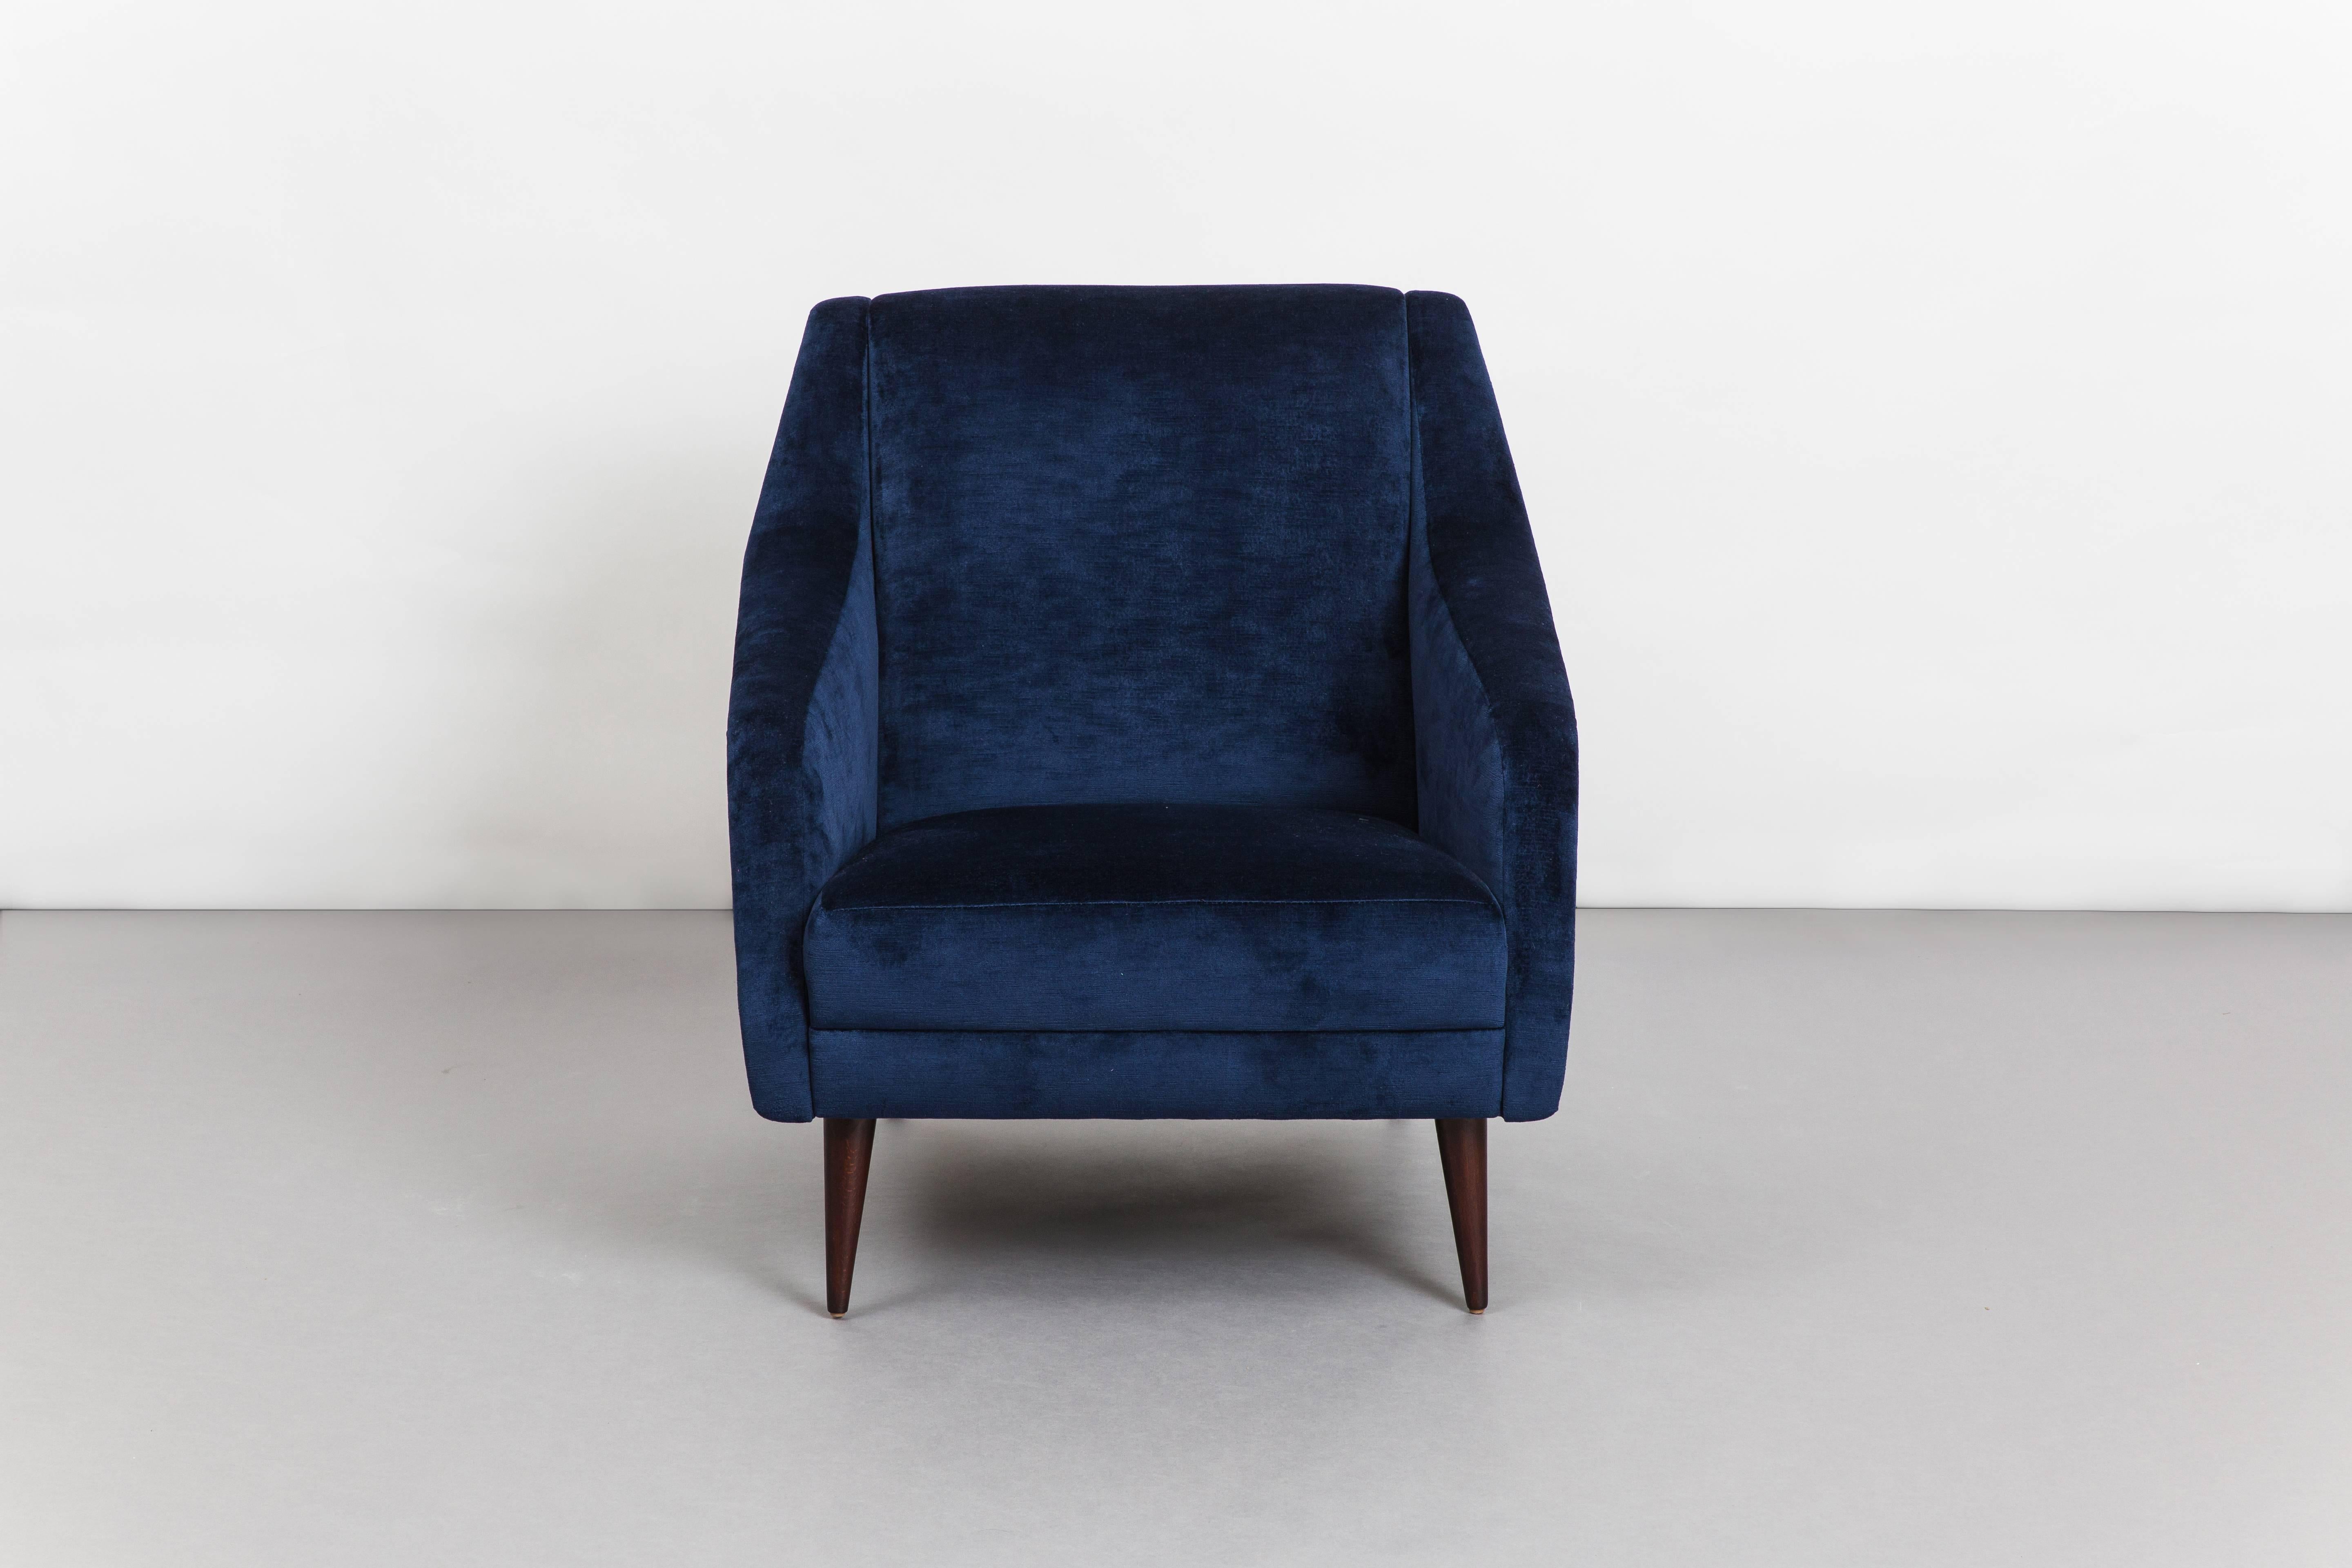 Carlo De Carli design for Cassina pair of sculptural armchairs or lounge chairs in navy velvet upholstery with stained beech legs. These armchairs are an iconic Carlo De Carli design with sleek architectural lines and great proportions for